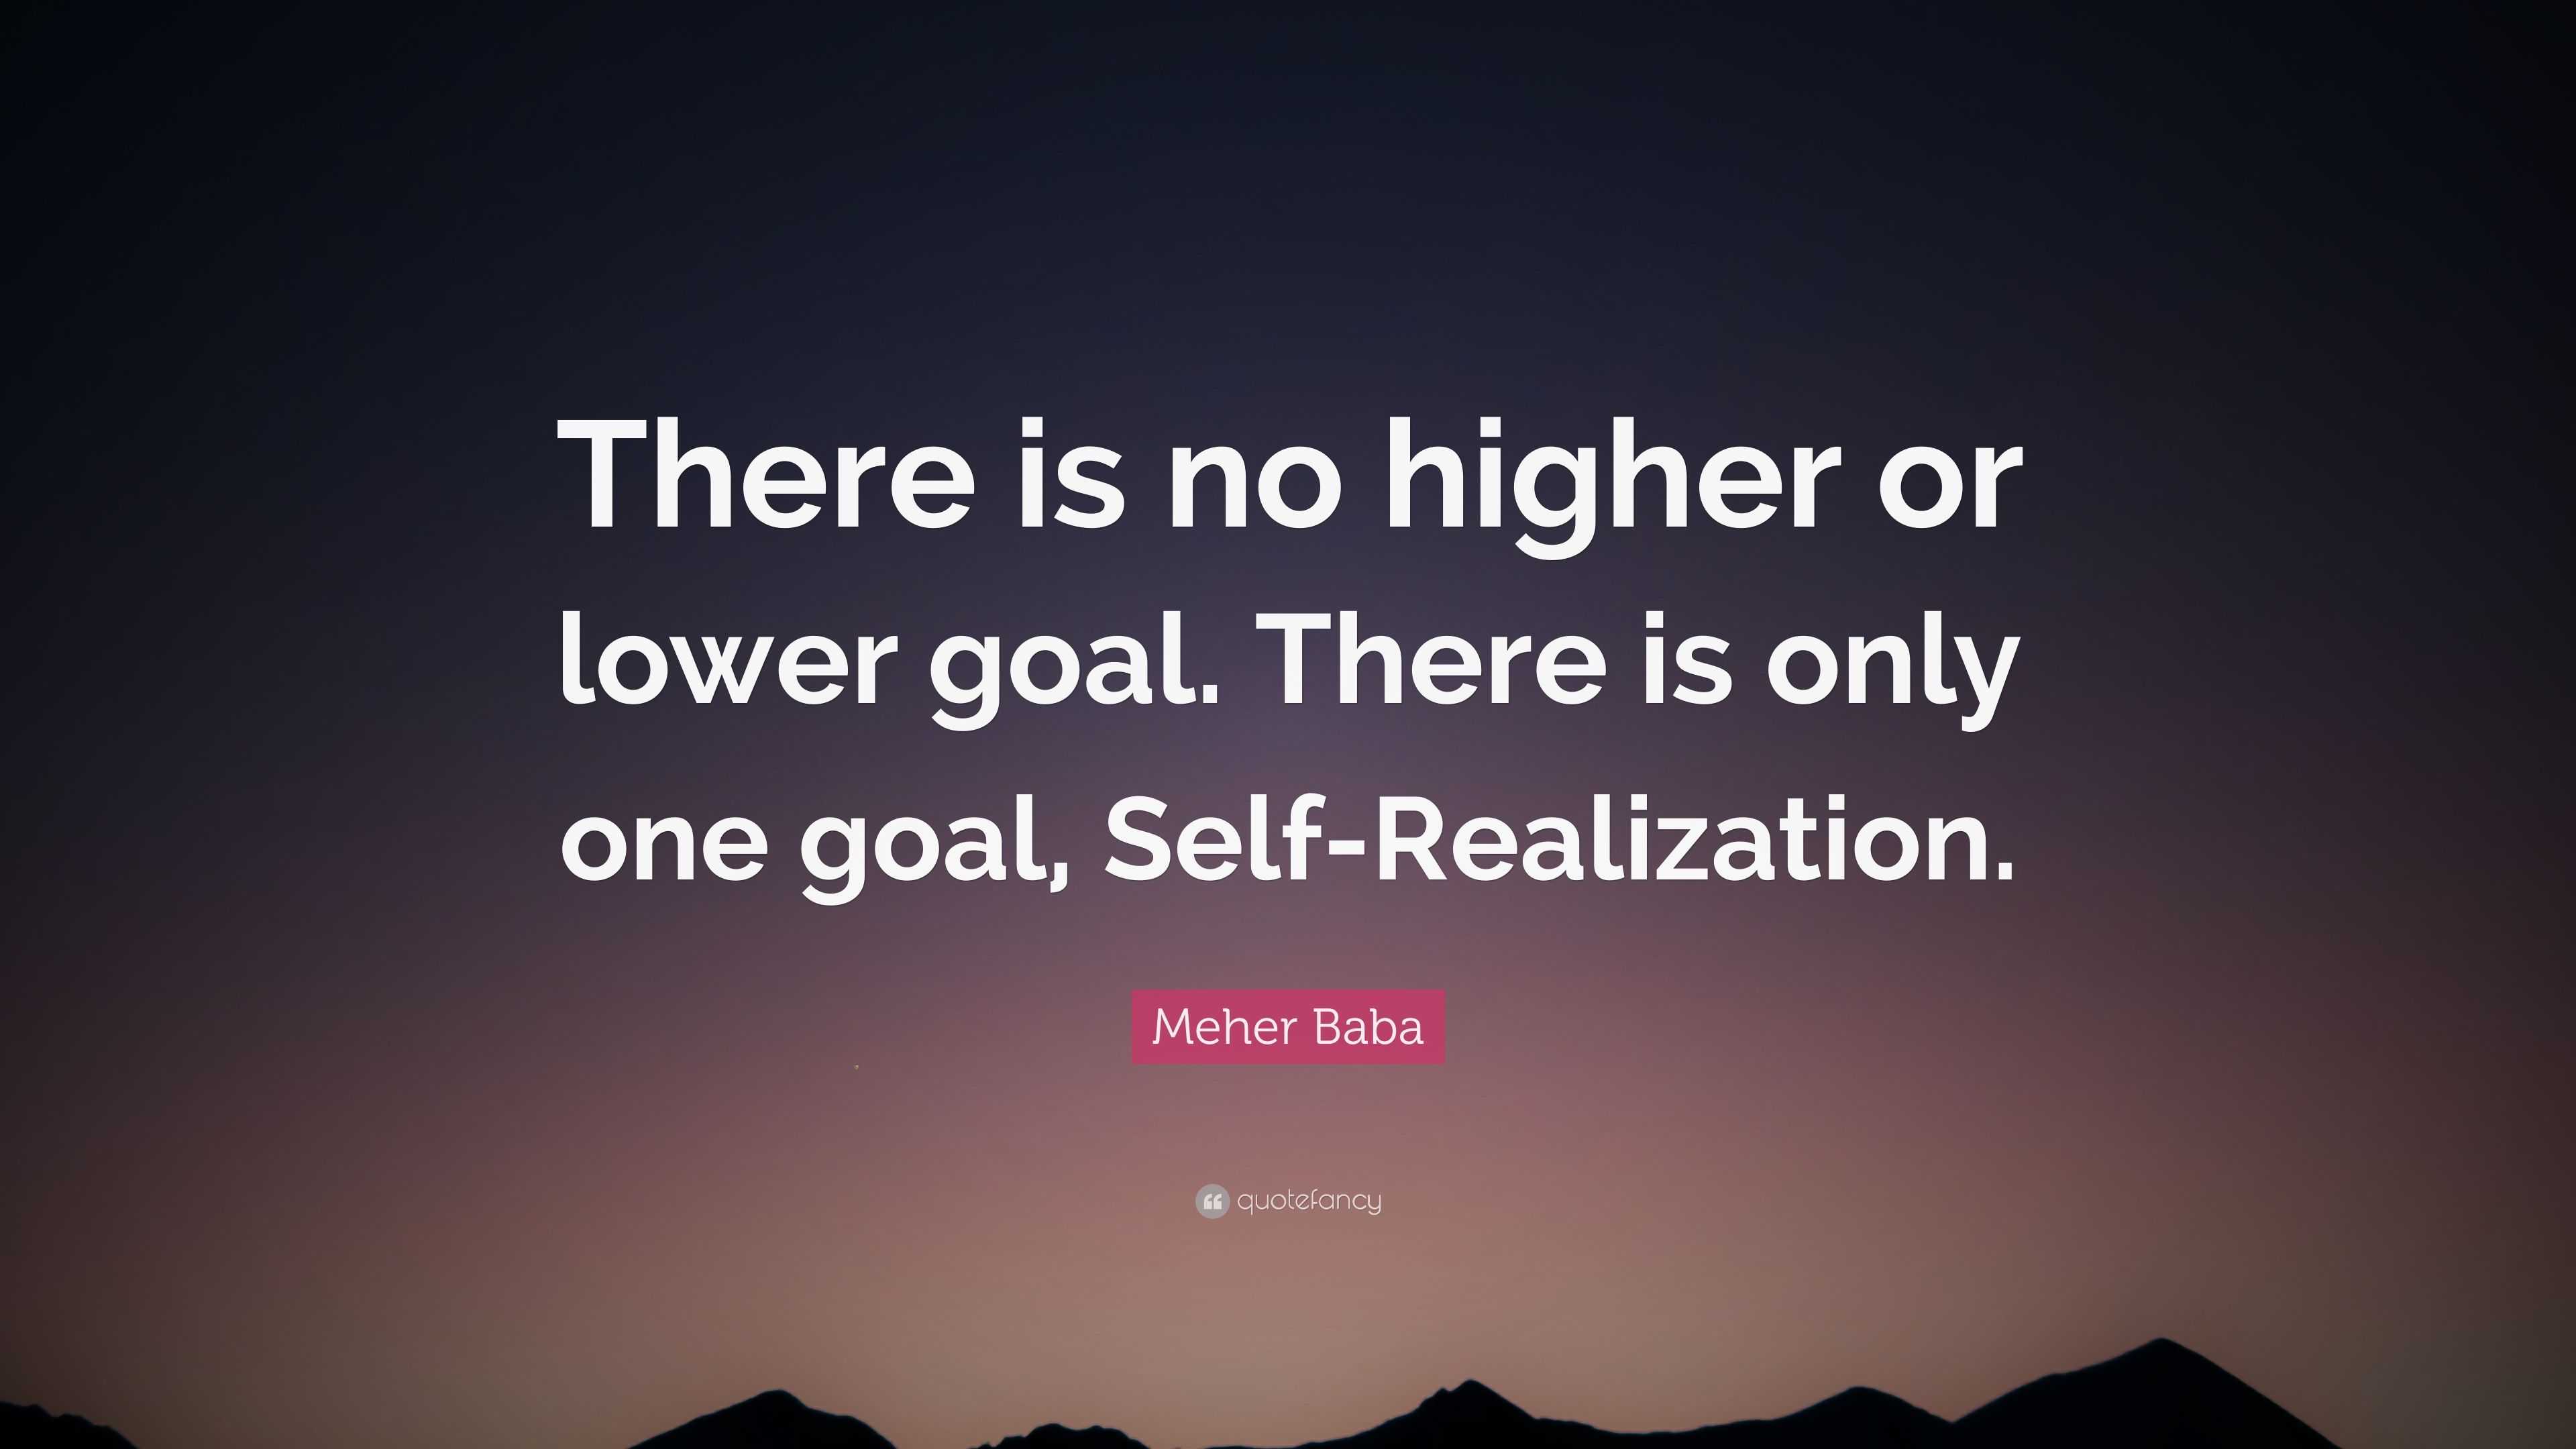 Meher Baba Quote: “There is no higher or lower goal. There is only one ...